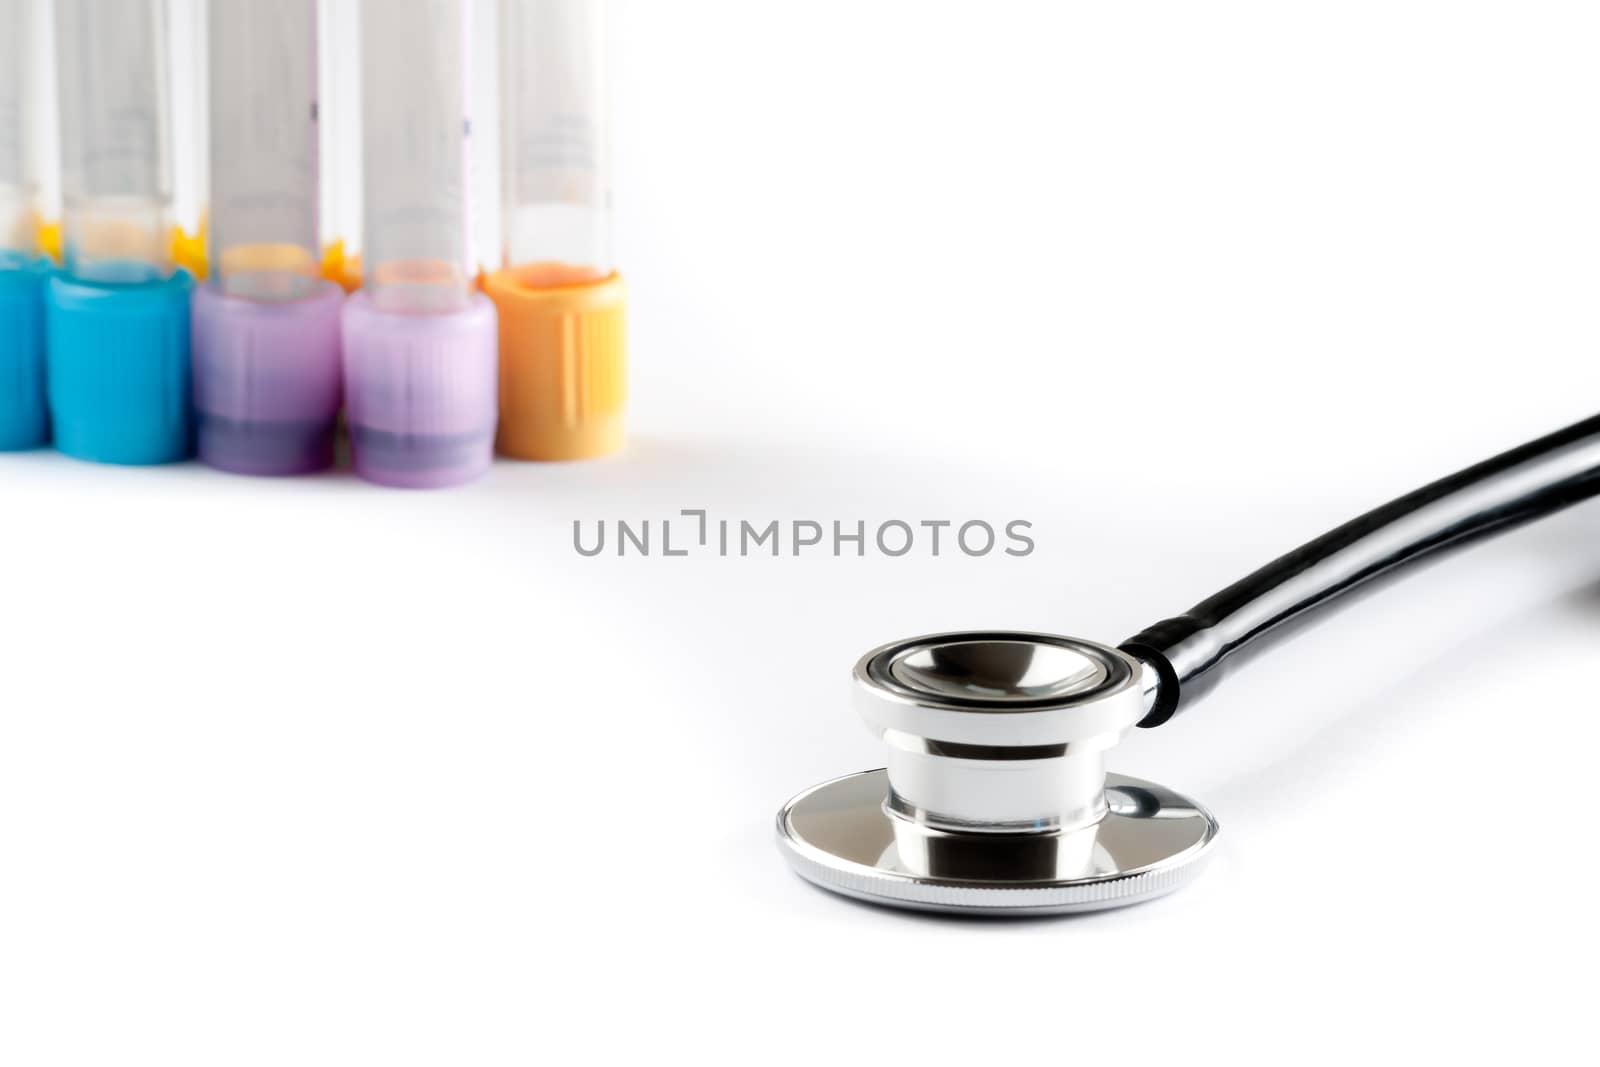 stethoscope in front of the test tubes in laboratory by donfiore